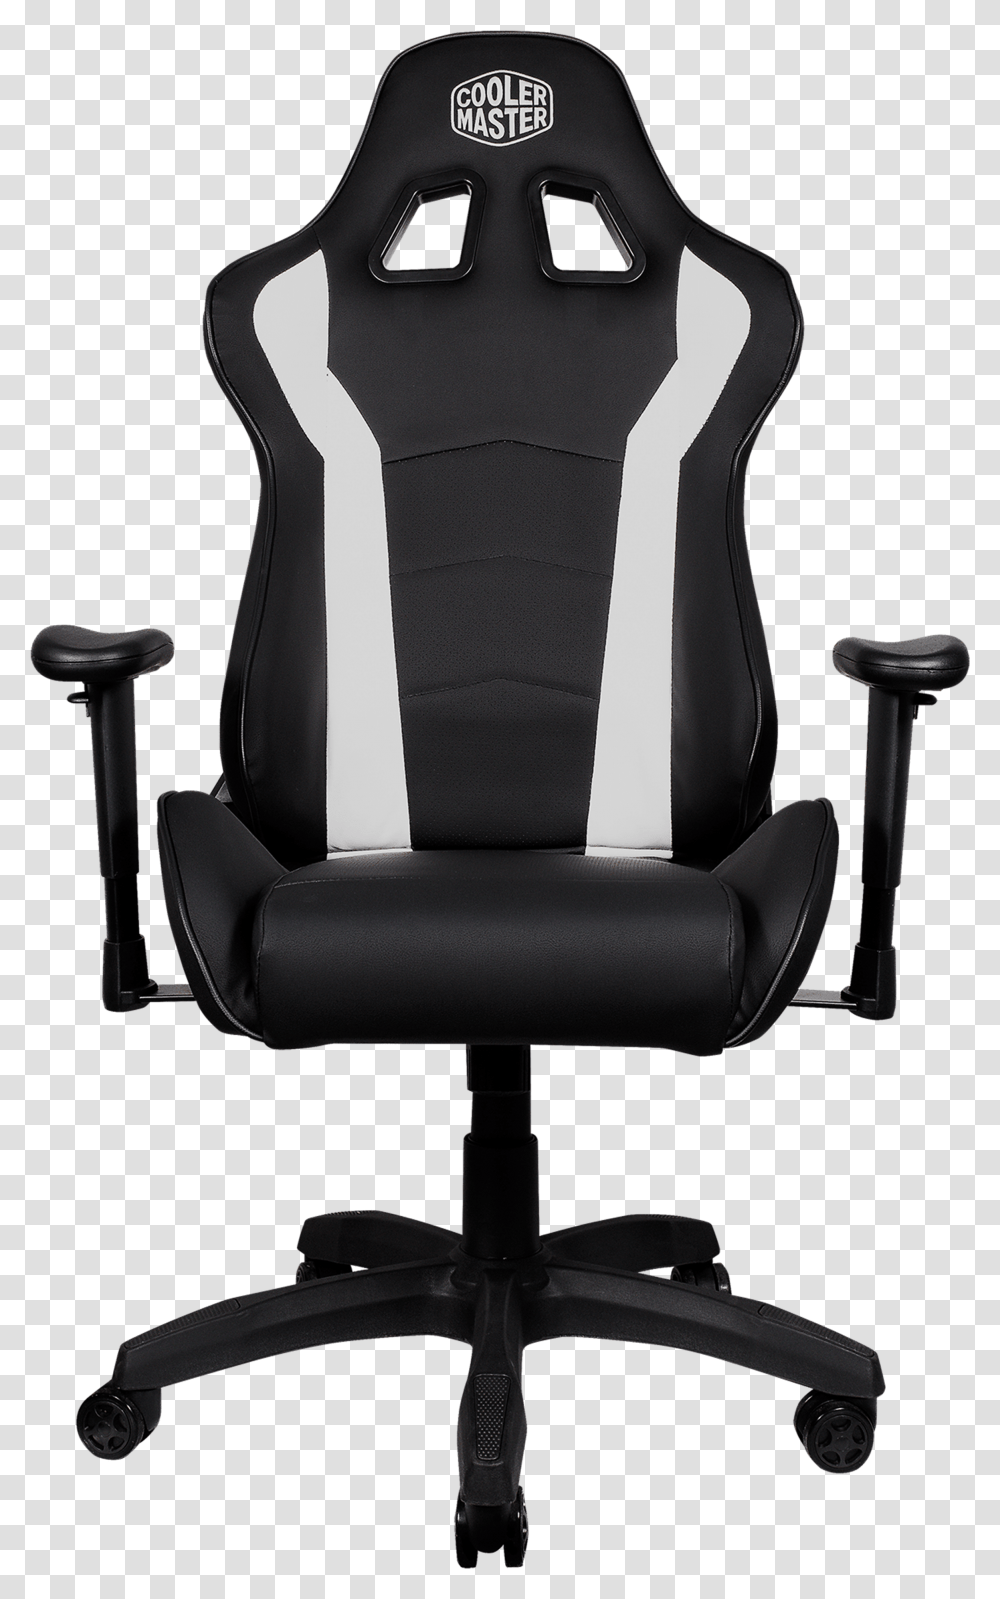 Cooler Master Gaming Chair Transparent Png